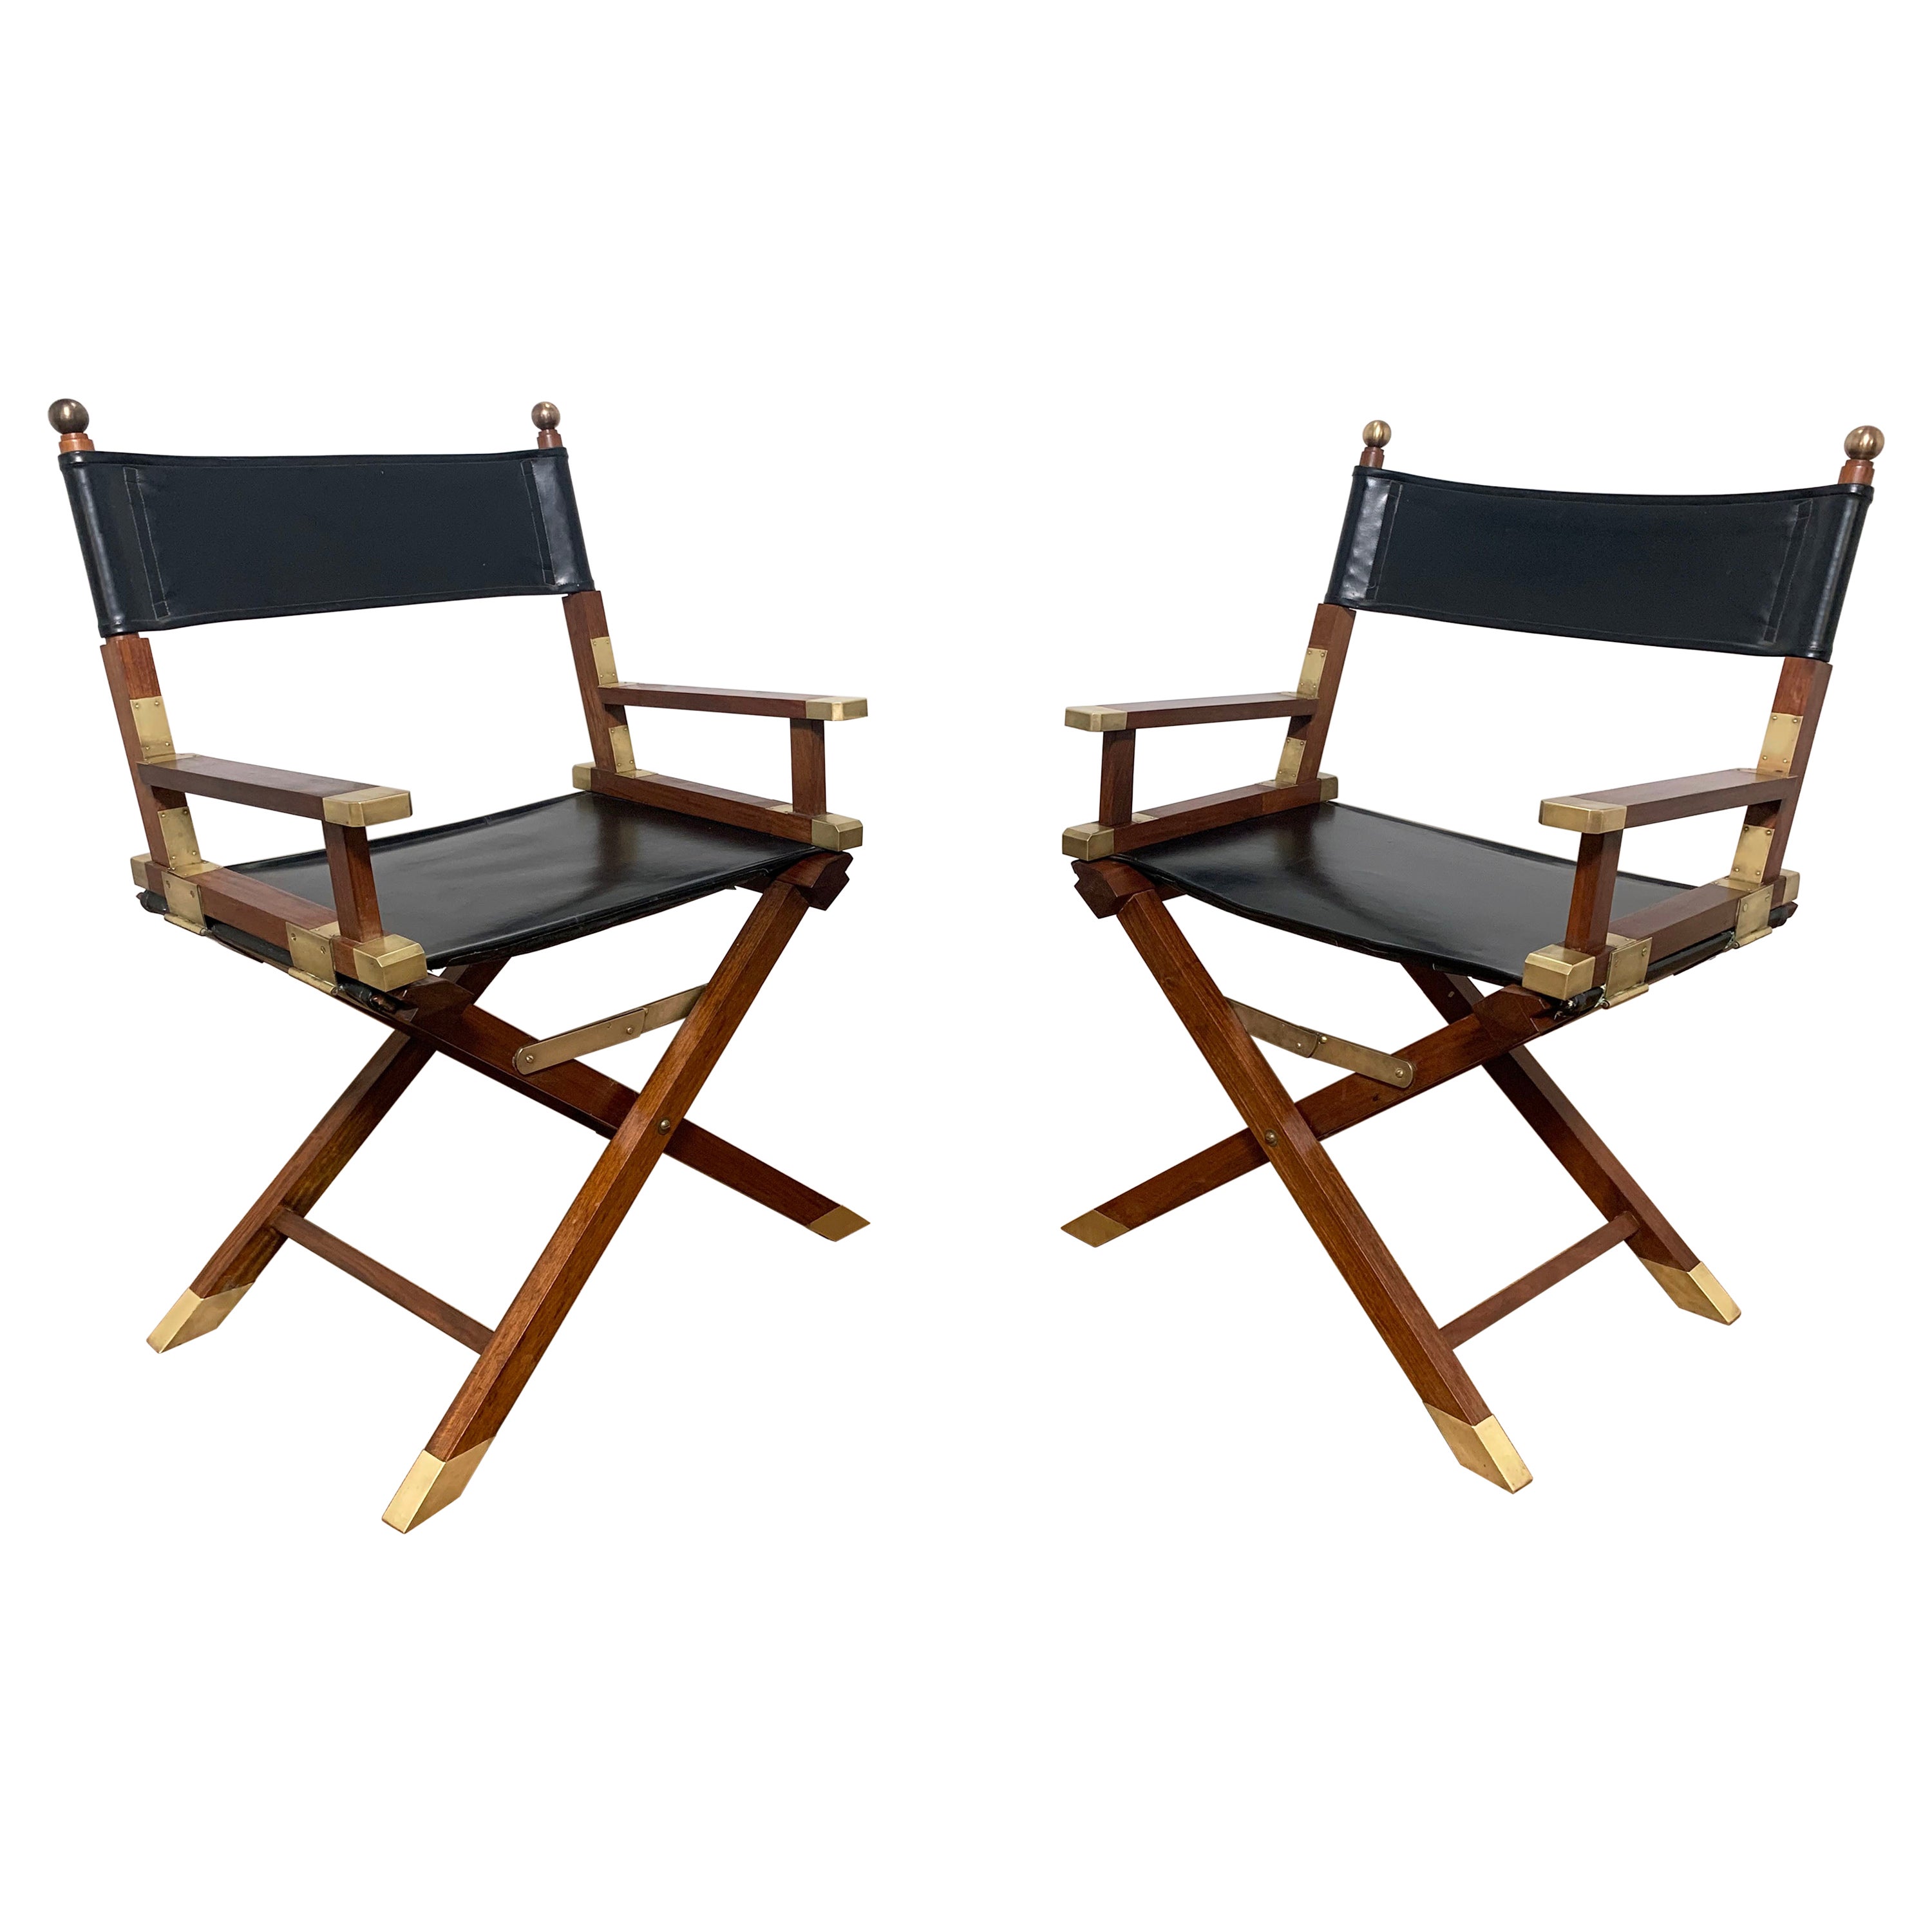 Pair of Bespoke Charlotte Horstmann Rosewood and Brass Campaign Chairs, C. 1950s